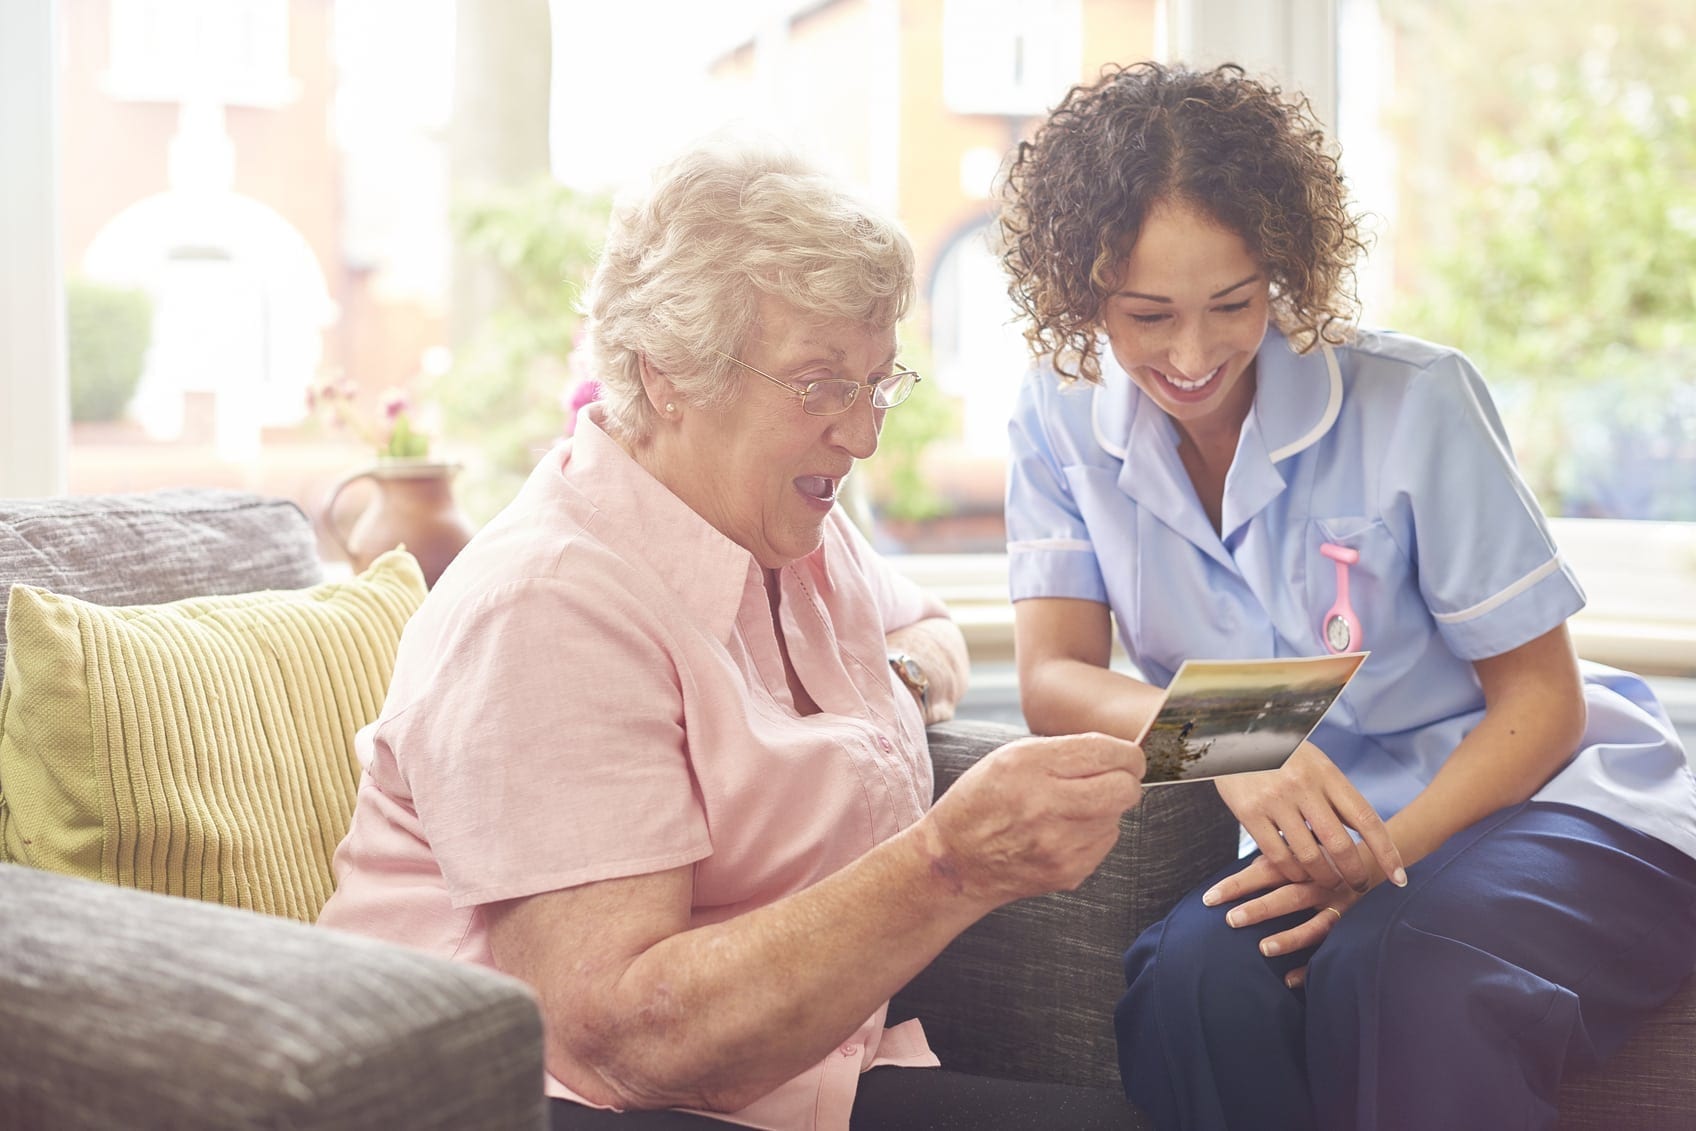 Female Nurse Spending Time With An Elderly Patient Stock Photo